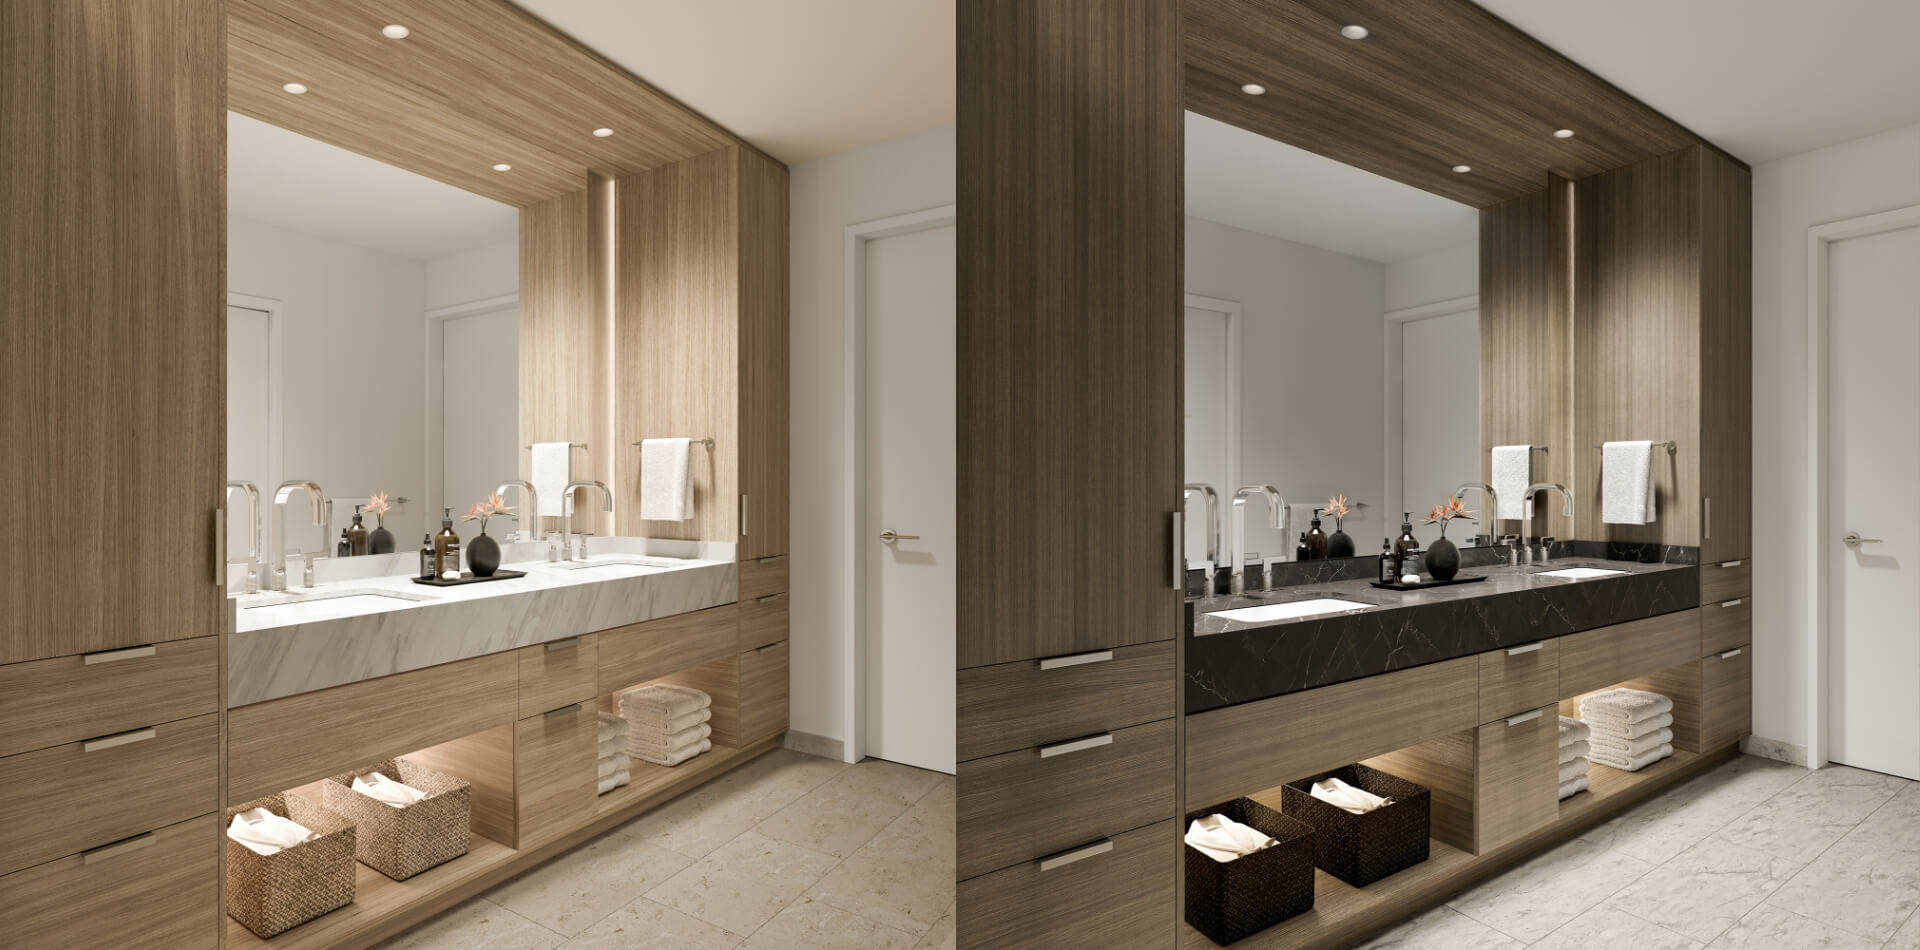 Side by side view of a bathroom vanity in a light and dark color scheme comparison.